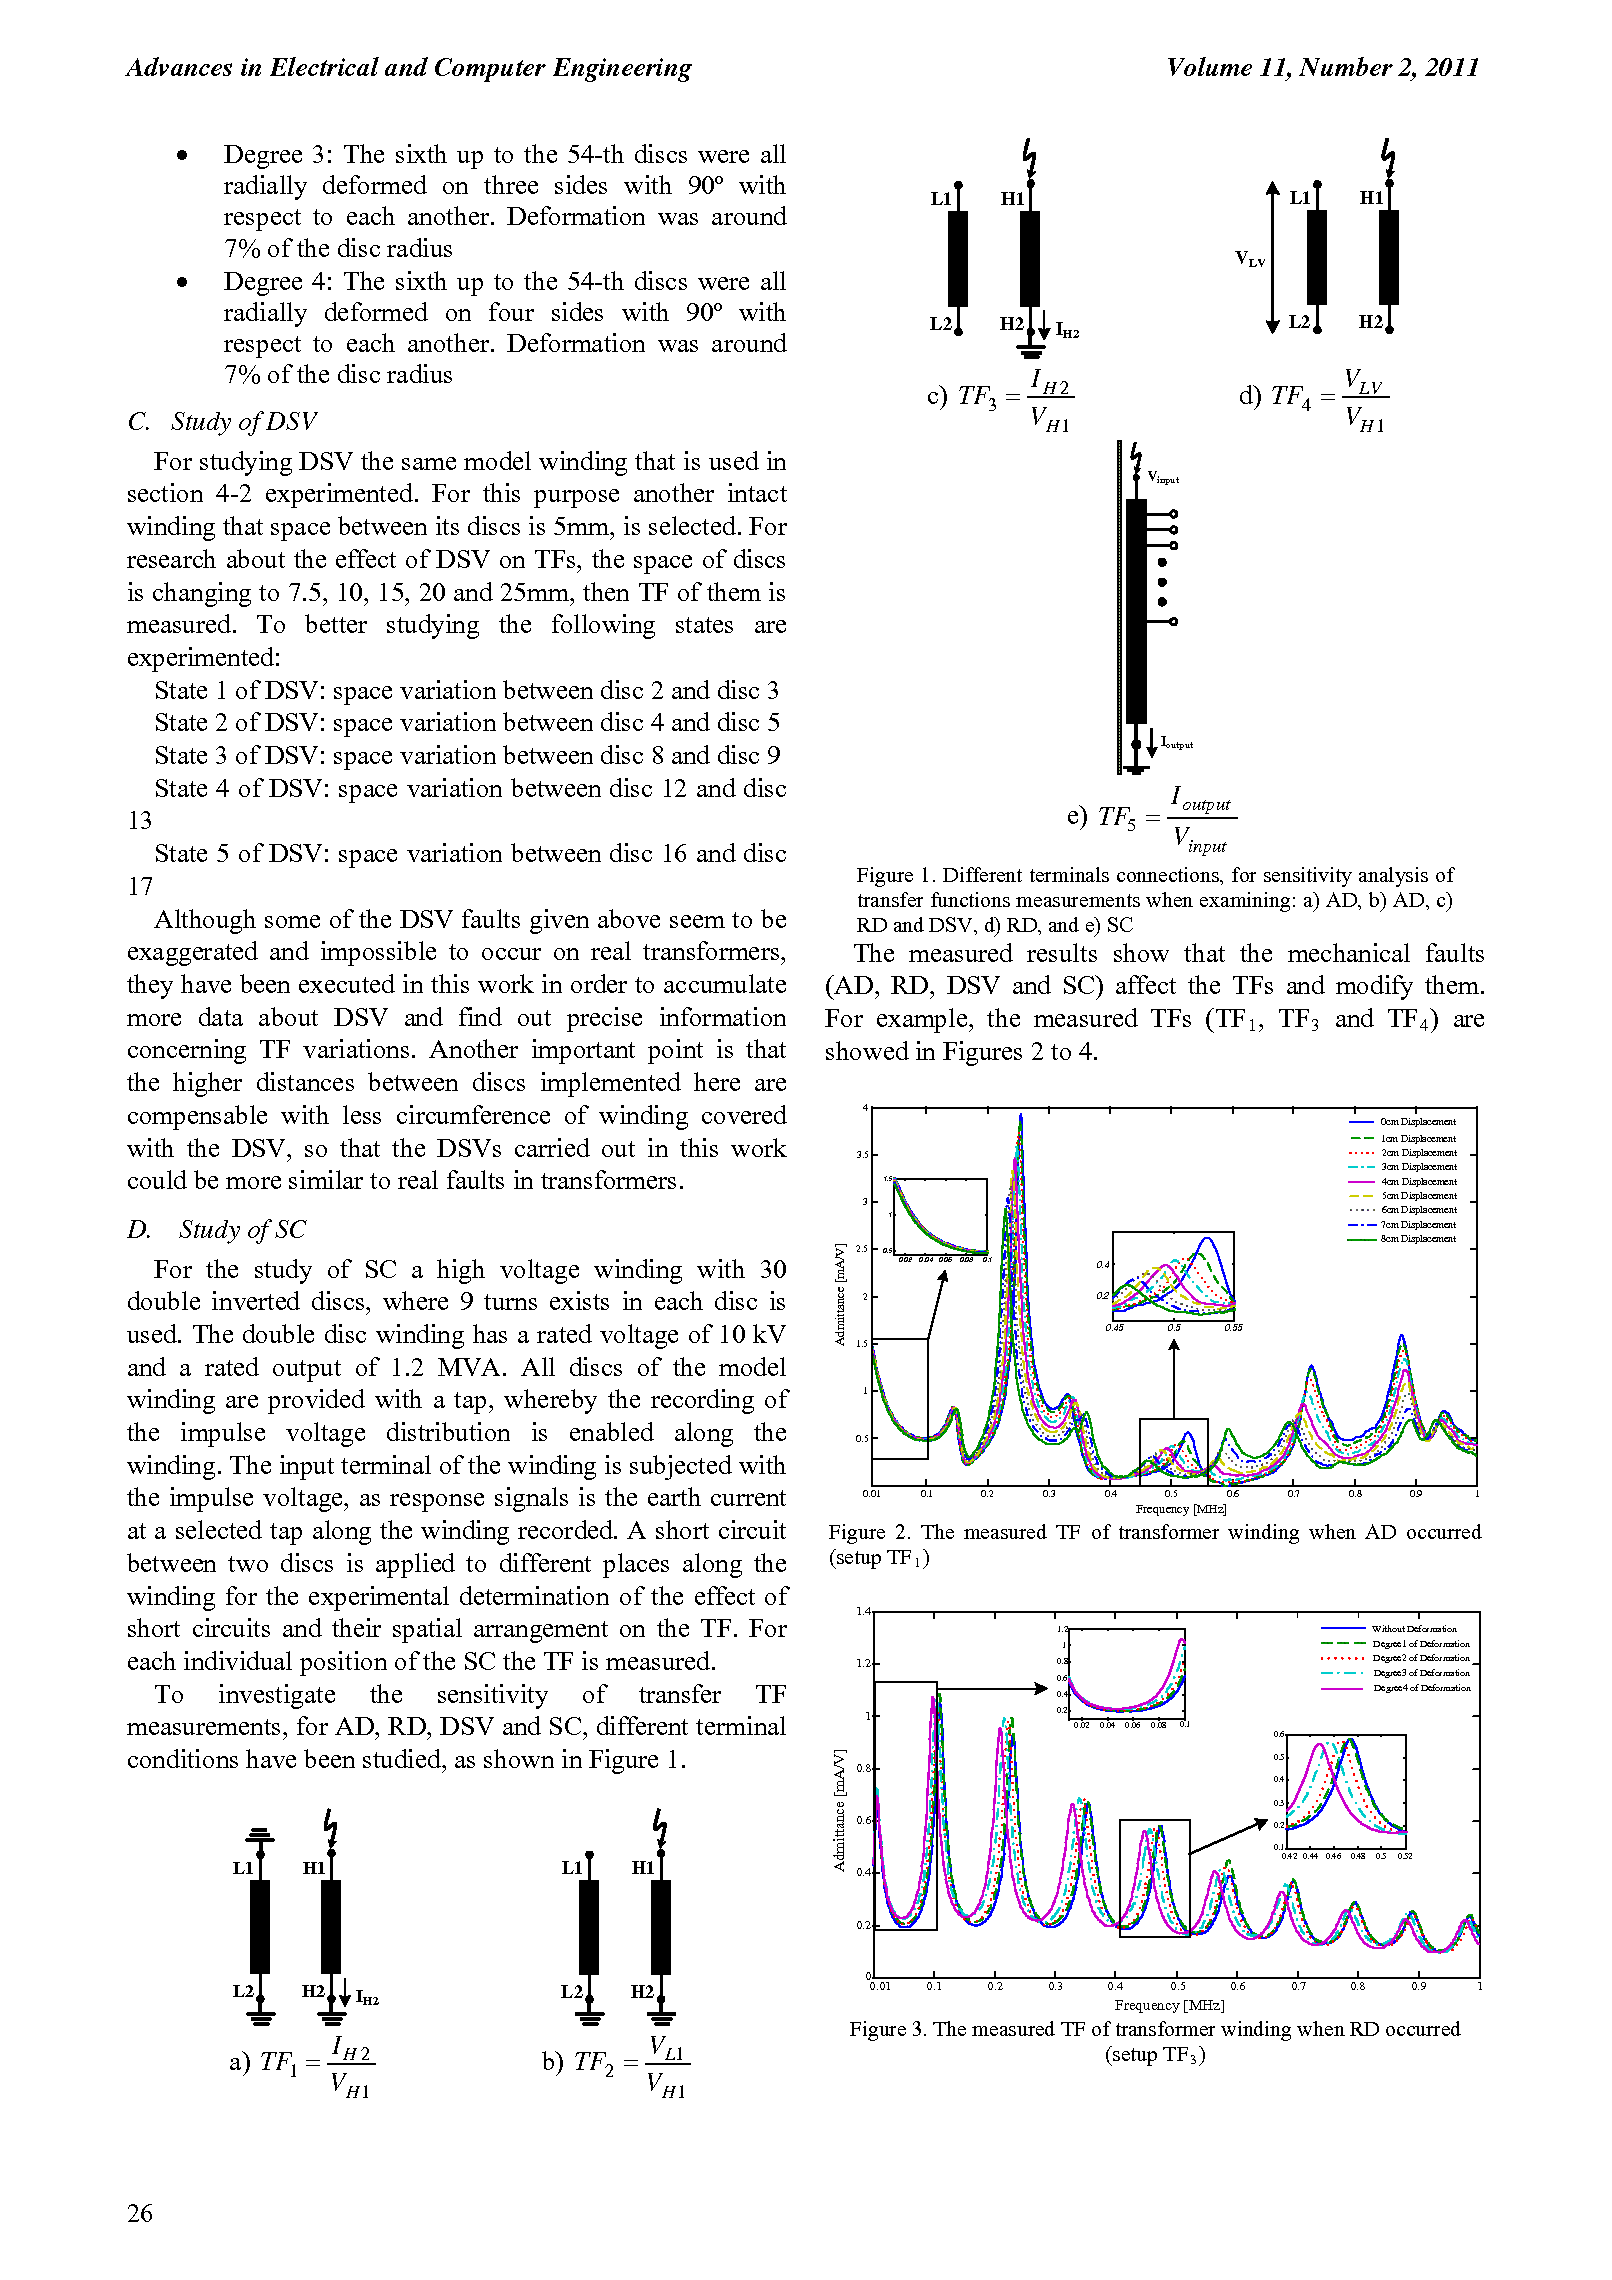 PDF Quickview for paper with DOI:10.4316/AECE.2011.02004